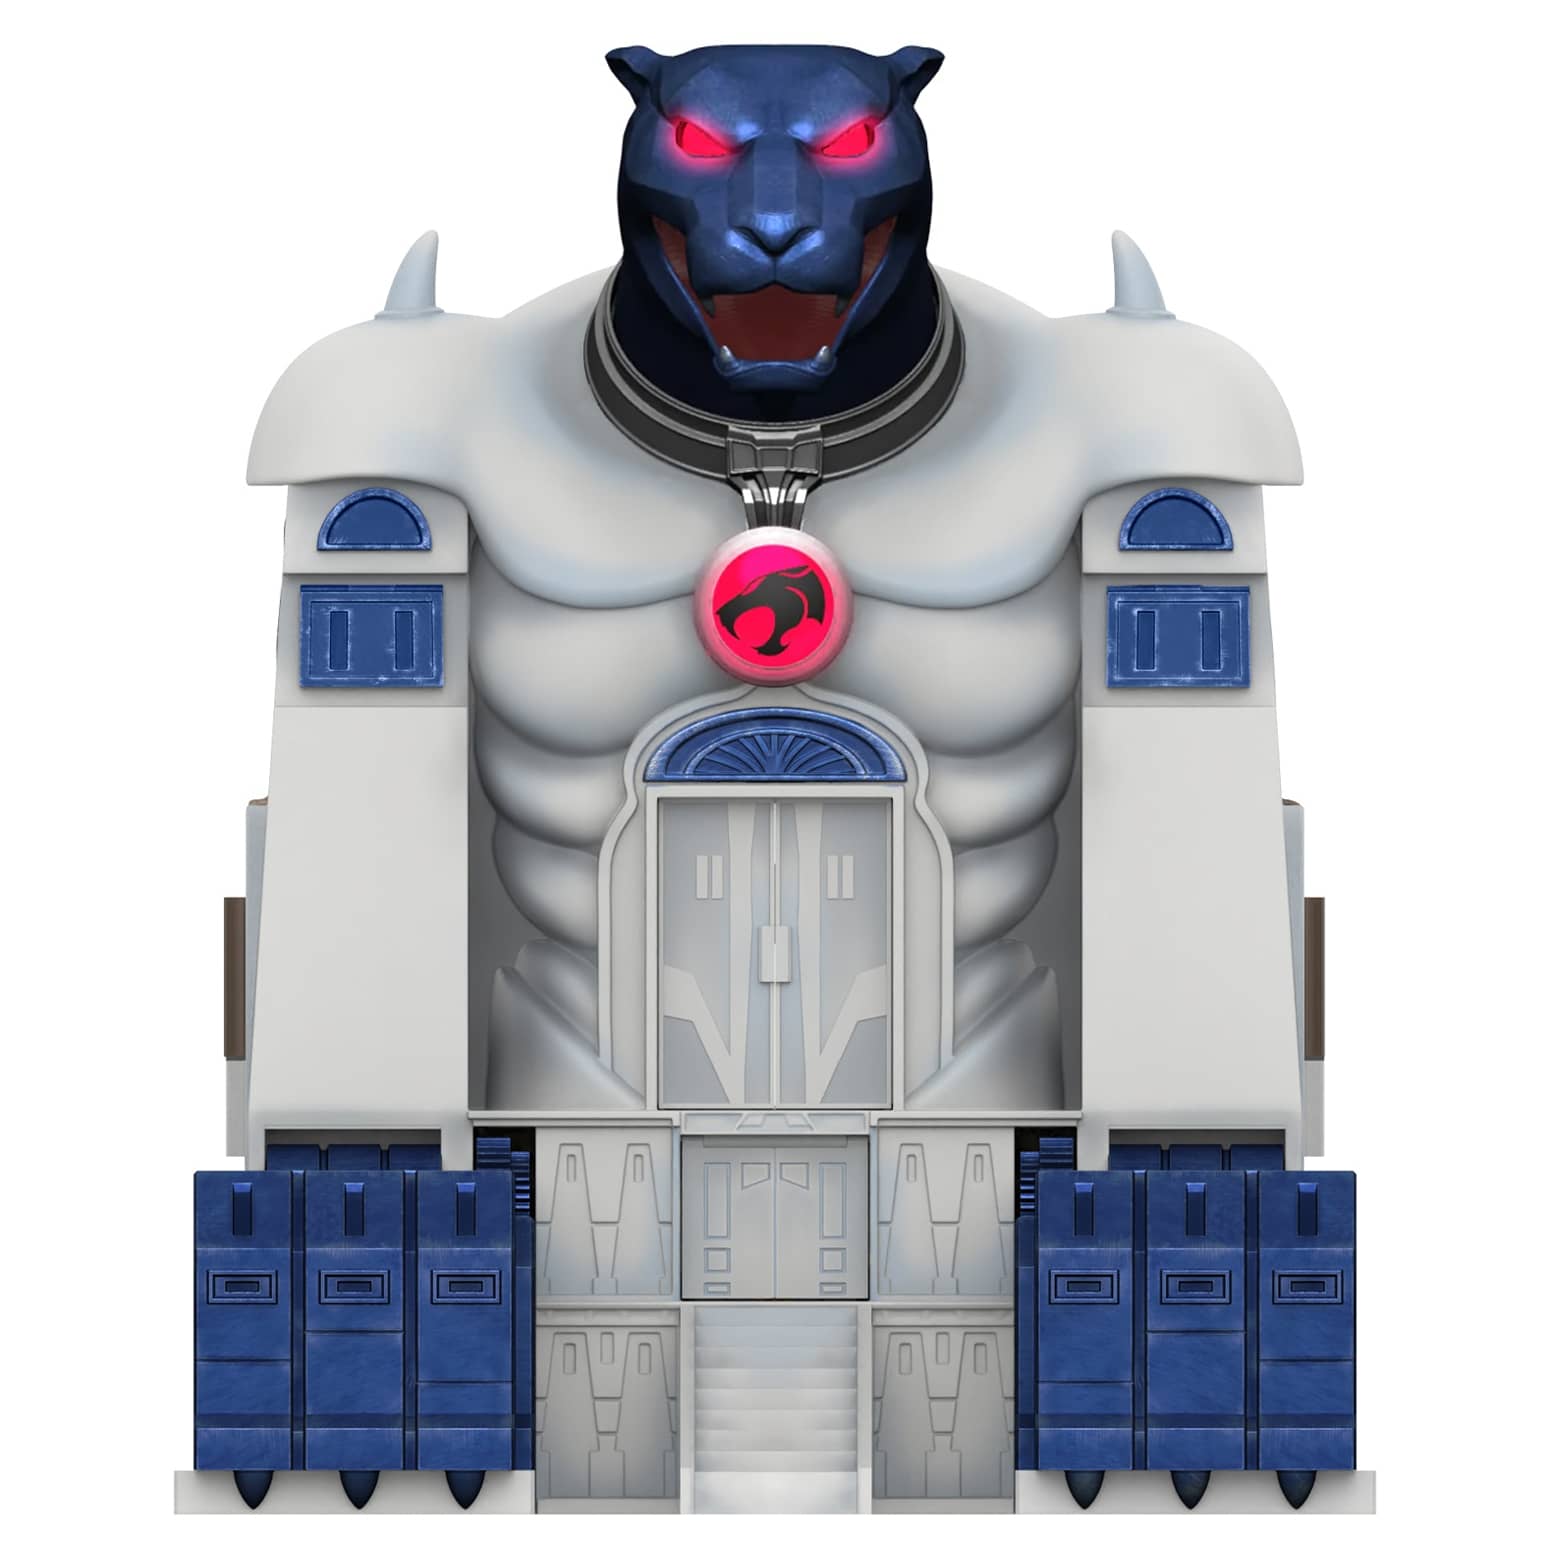 ThunderCats Ultimates! - Massive Cat's Lair Playset - Stands 3 Feet Tall!